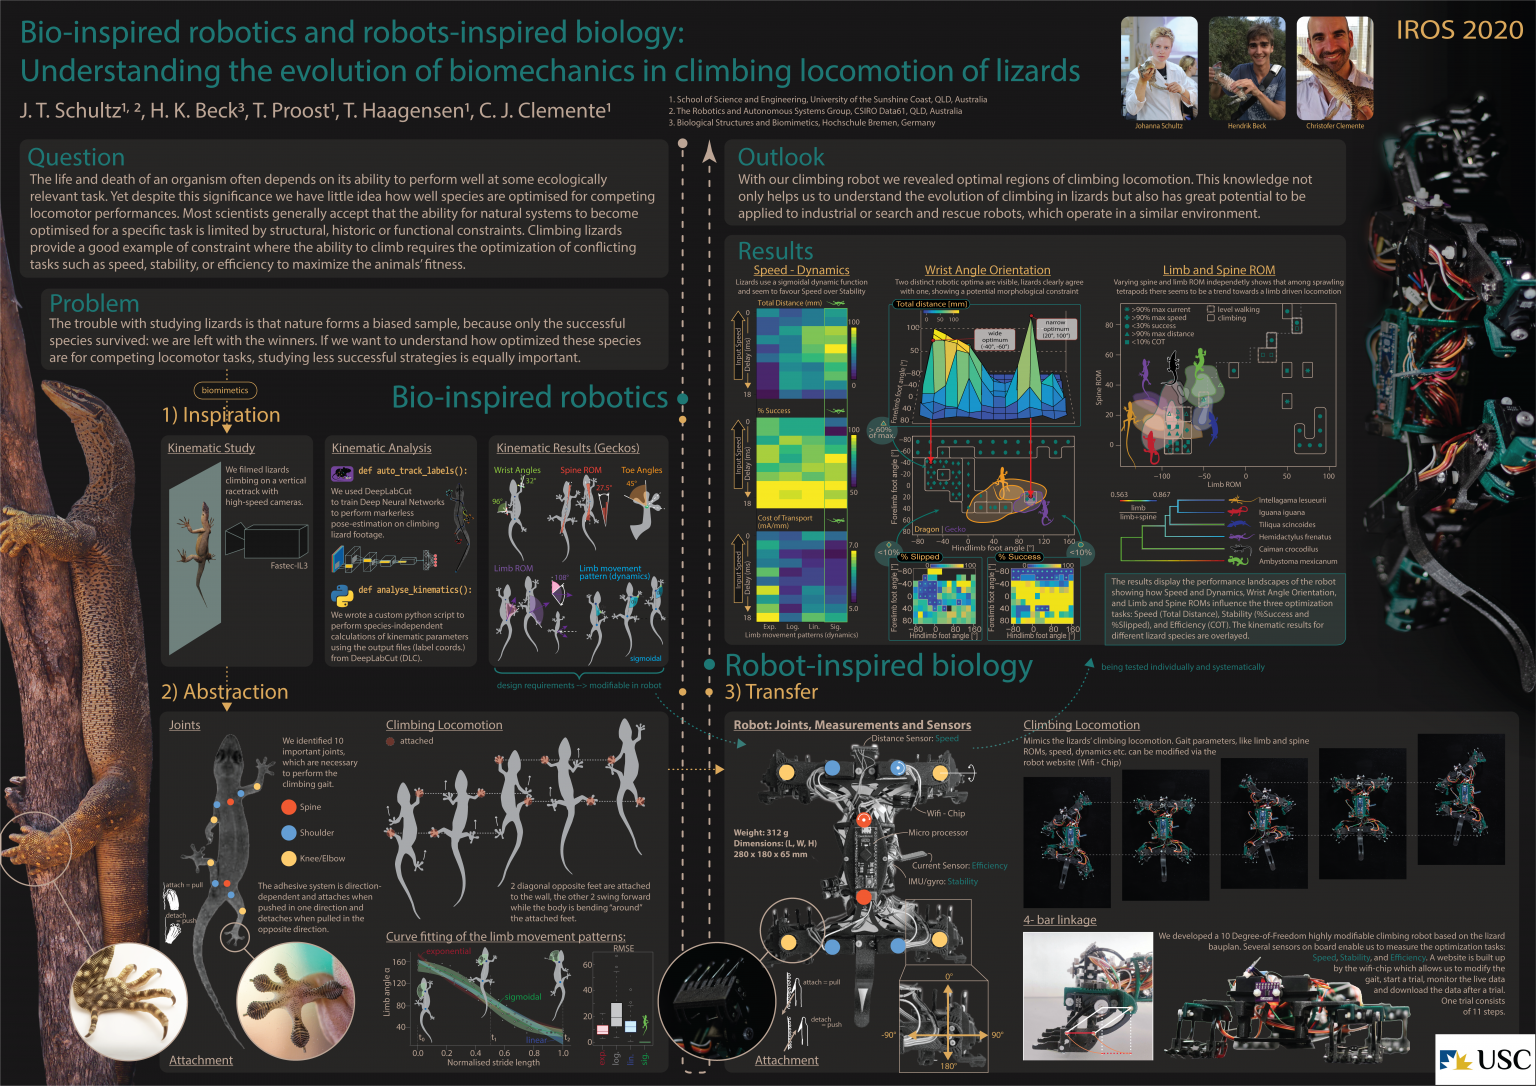 Poster made for the IROS conference in 2020